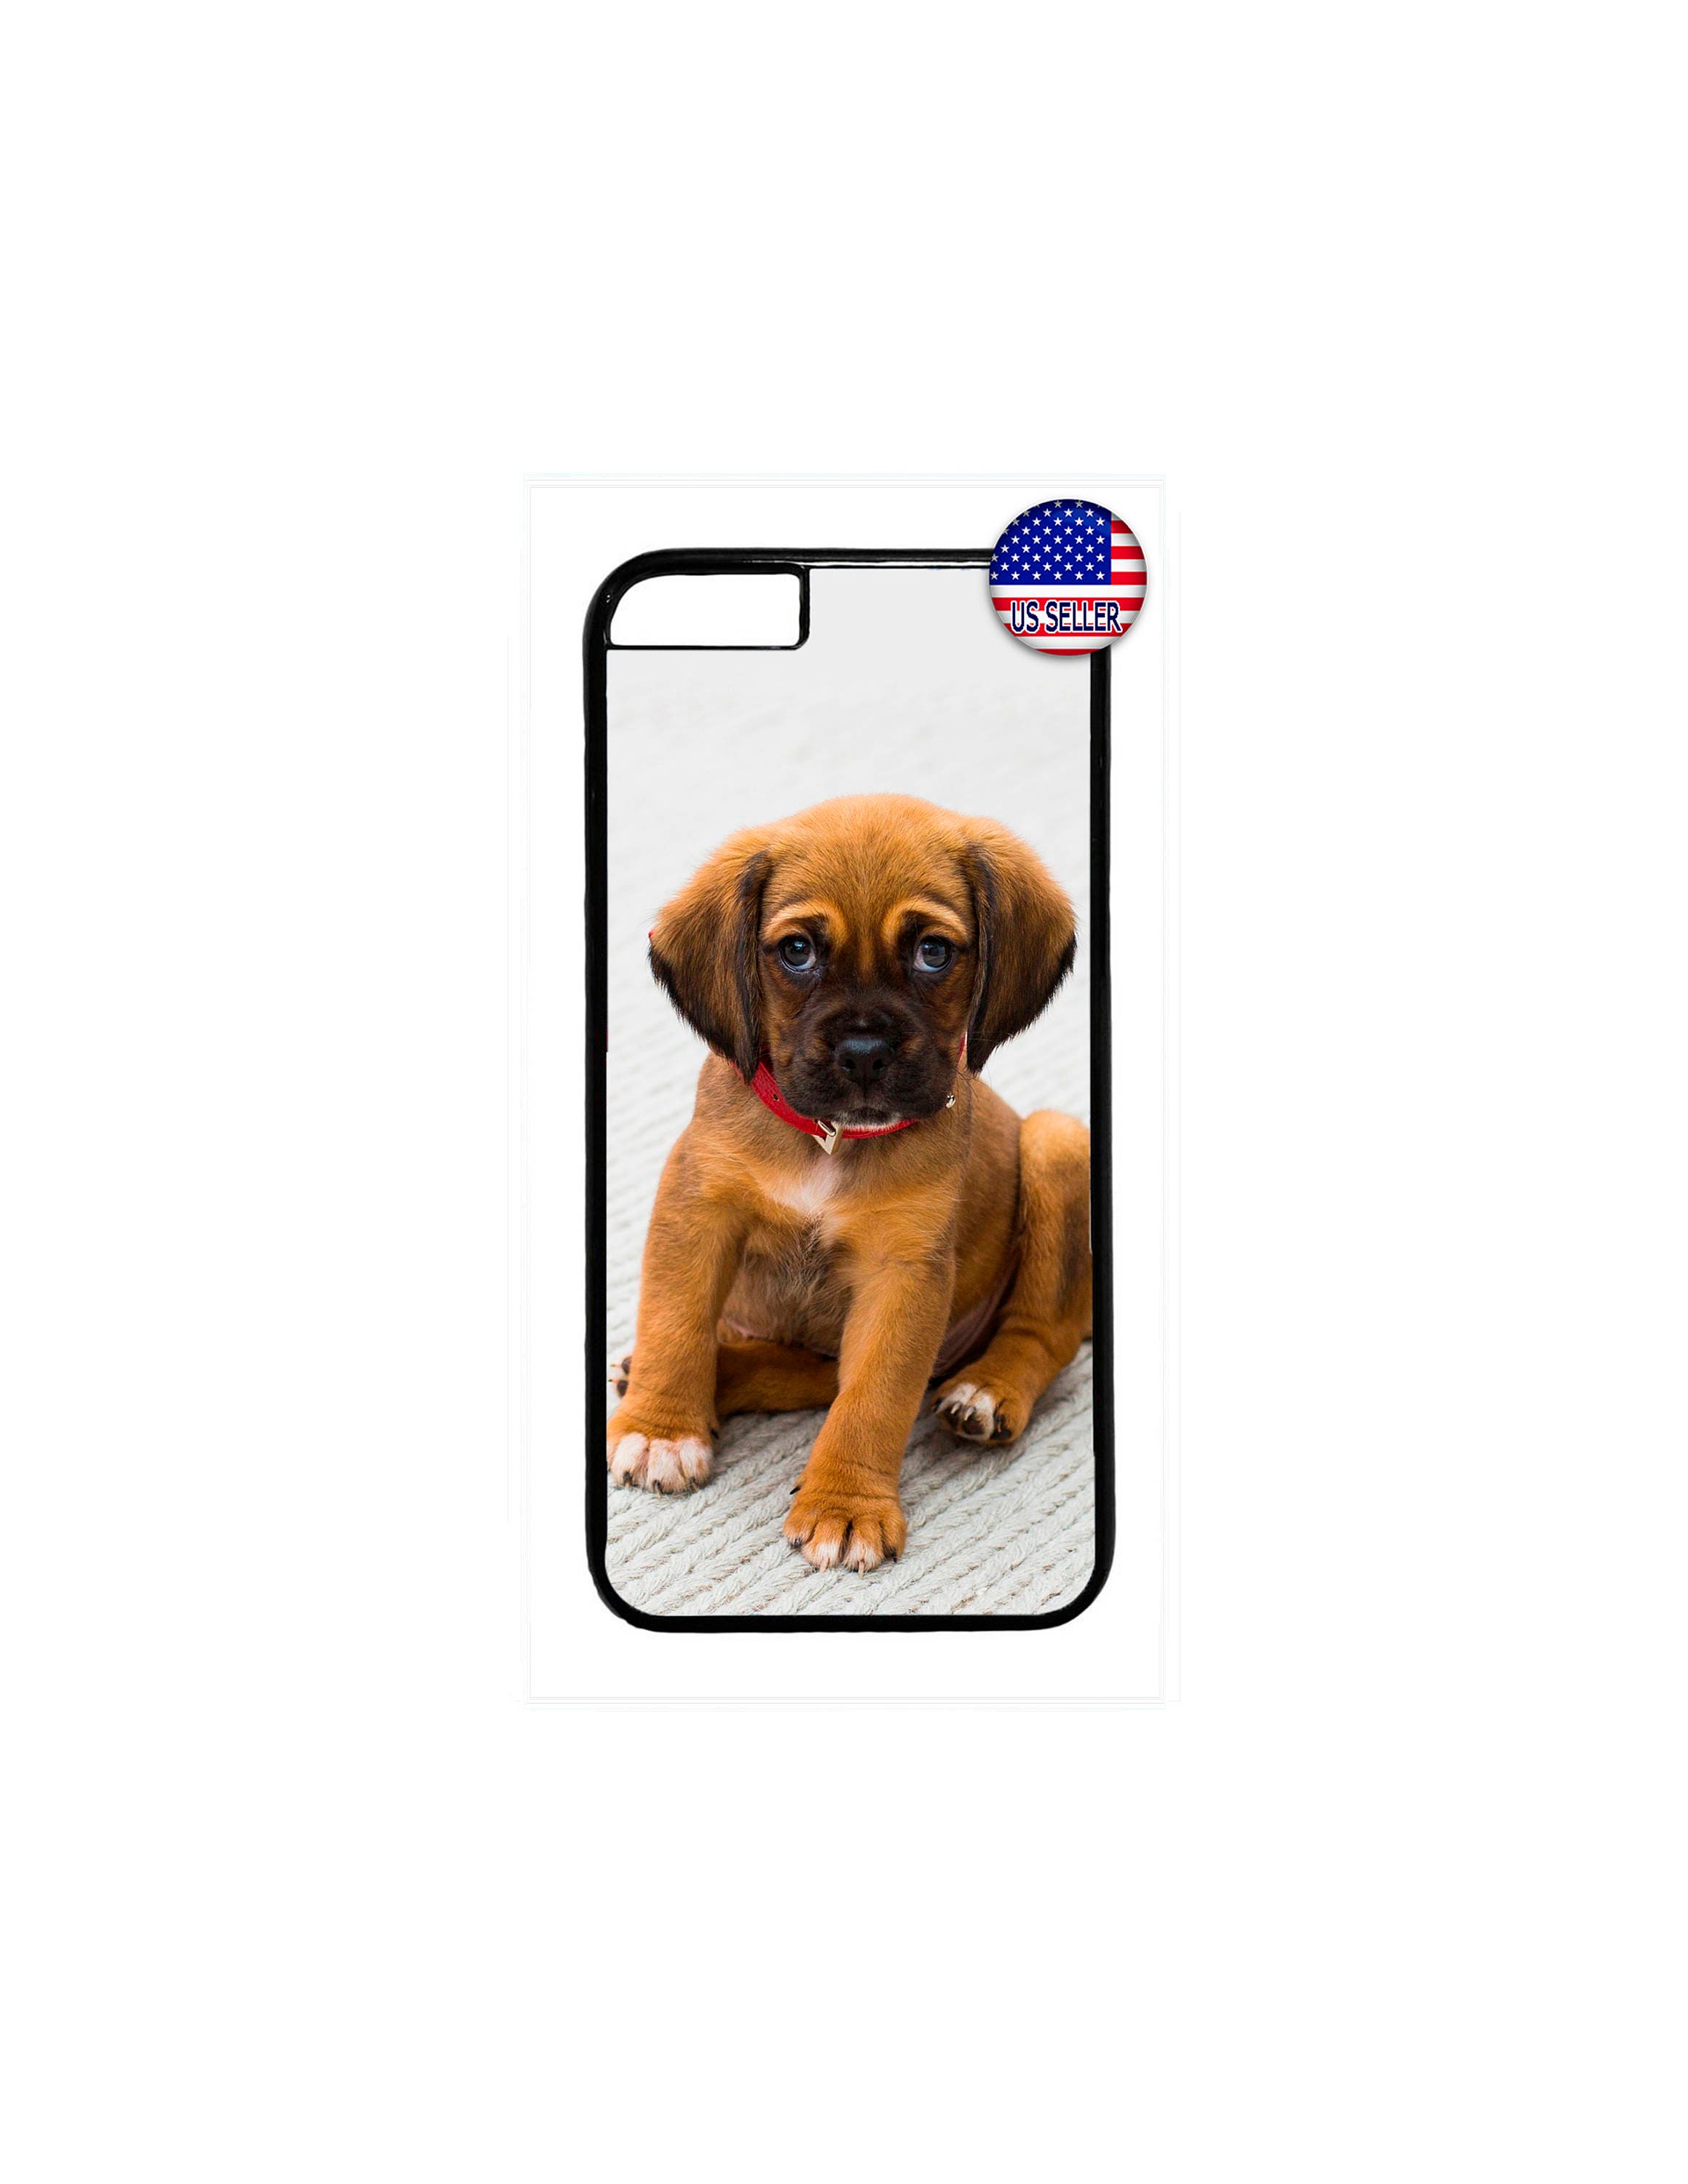 New Cute Dog Puppy Pet Hard Rubber TPU slim Case Cover for